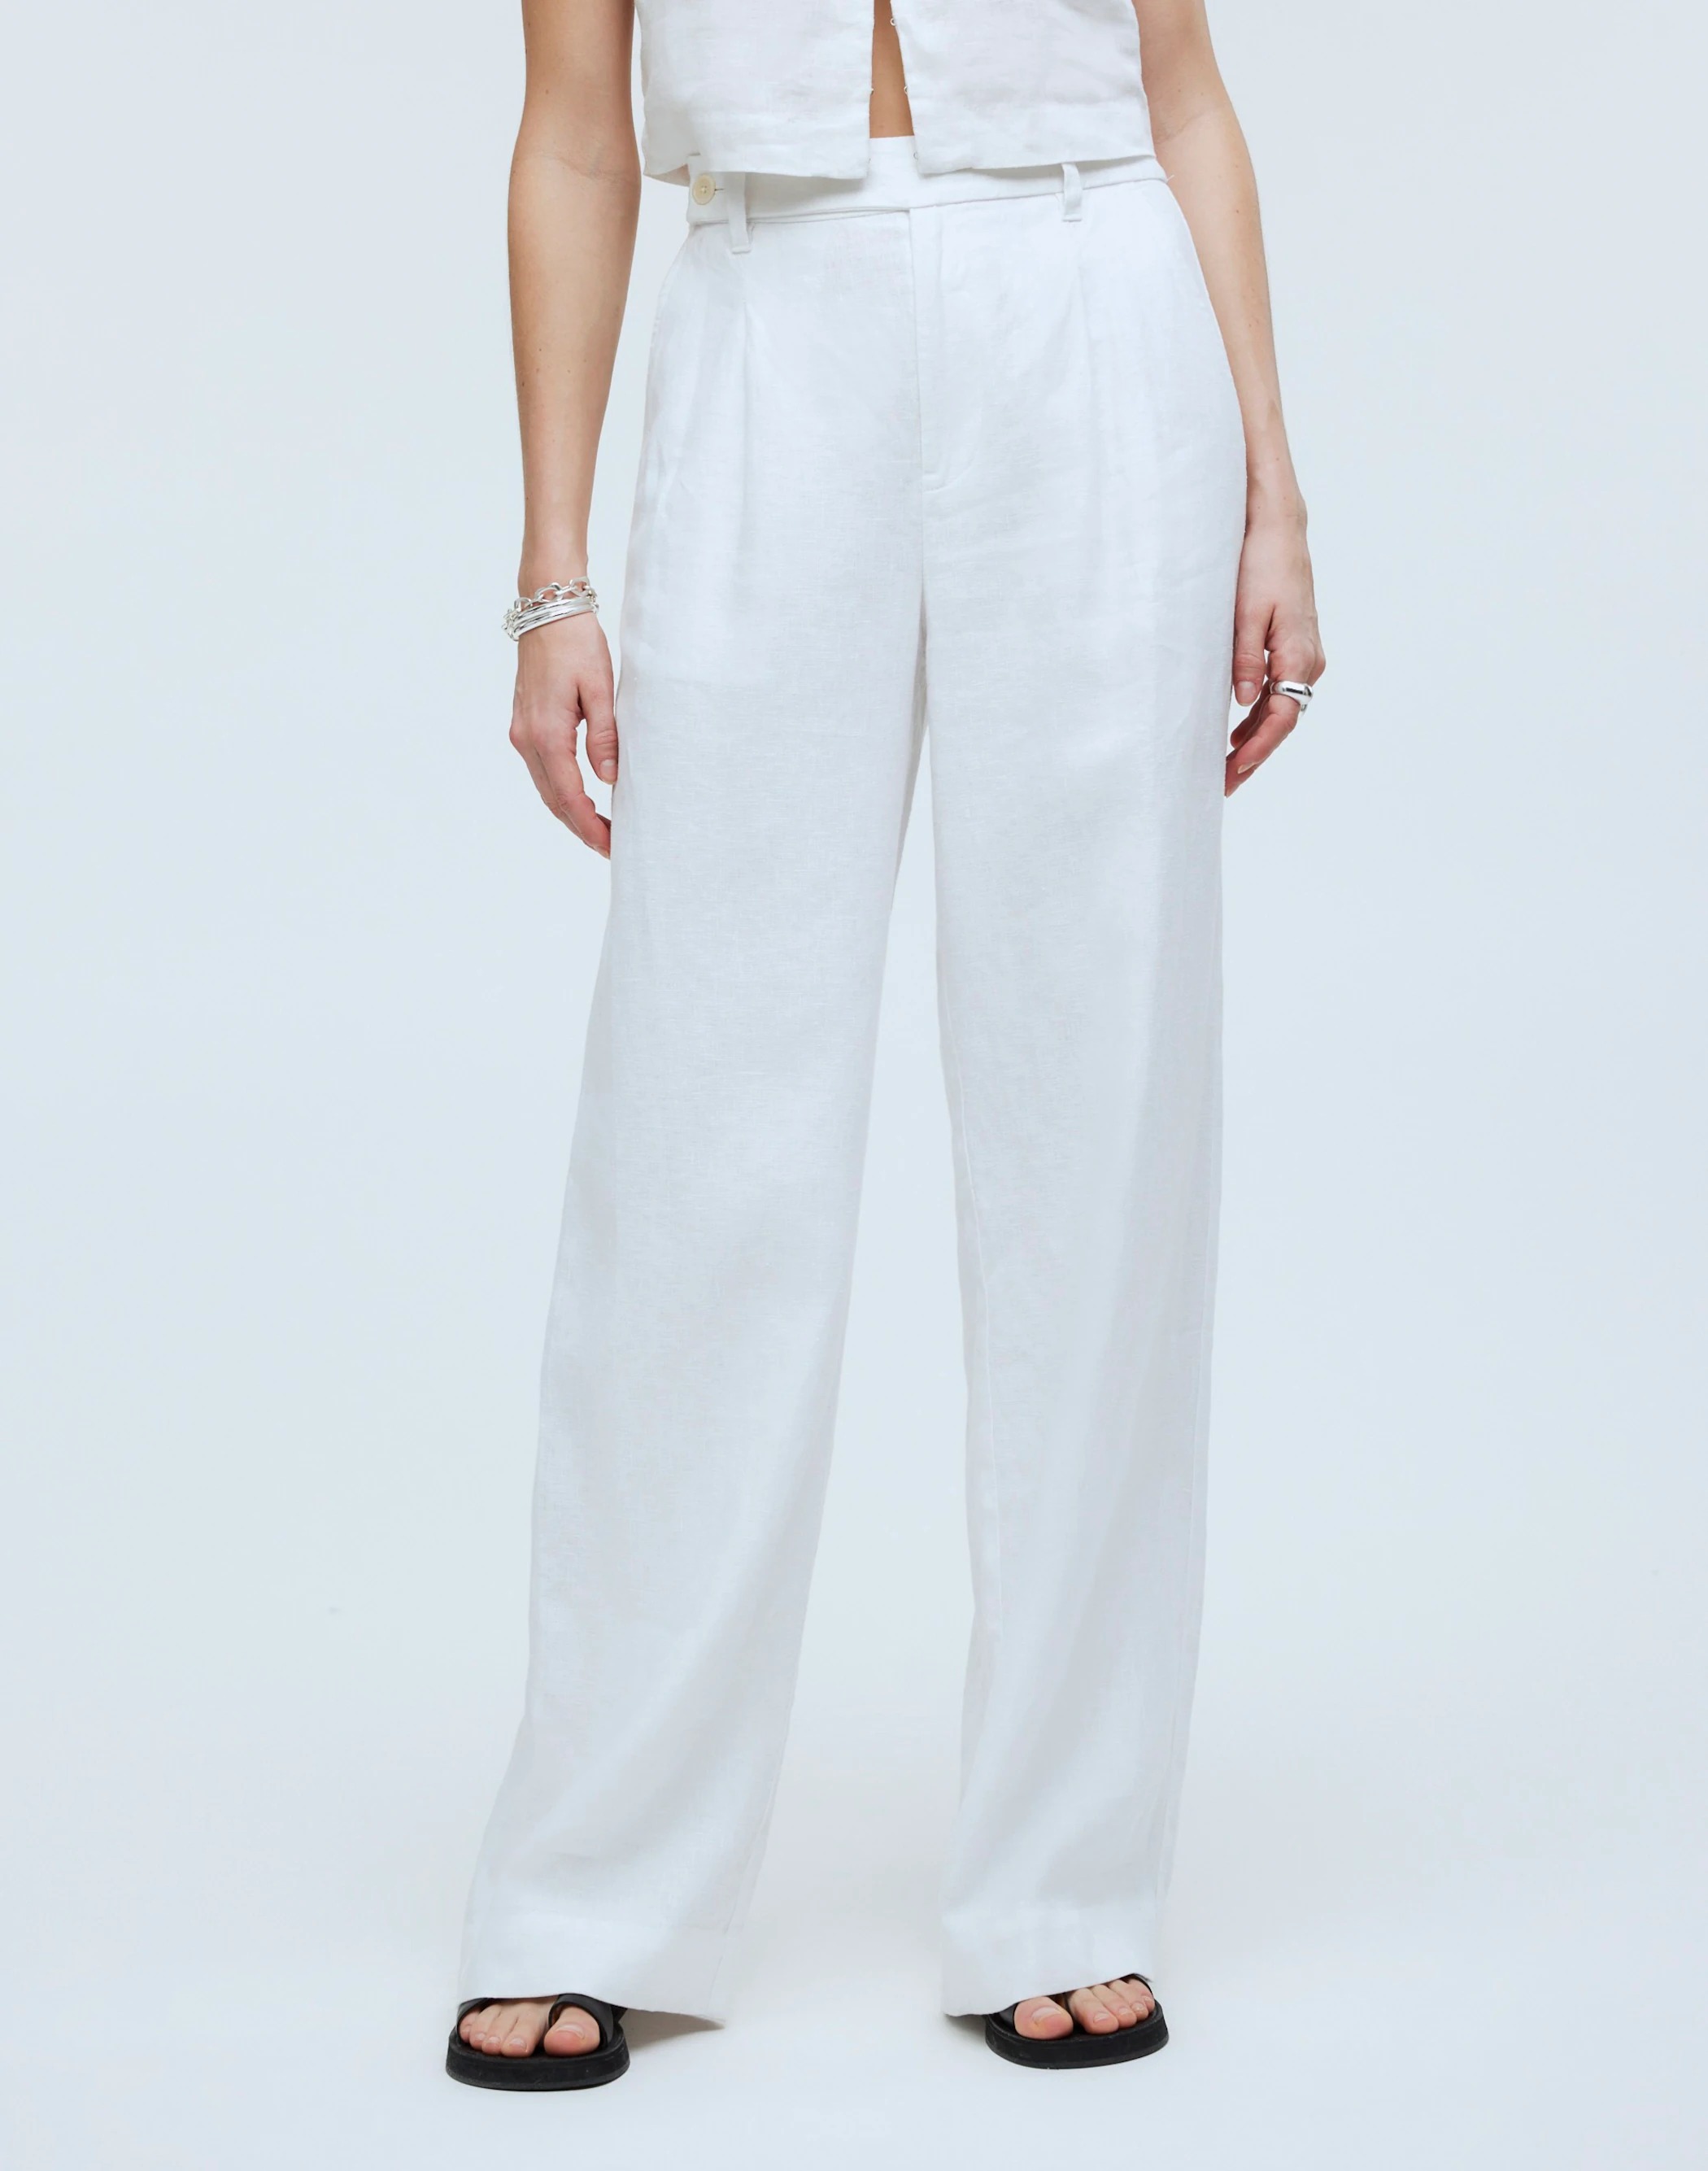 Madewell white tailored linen pants